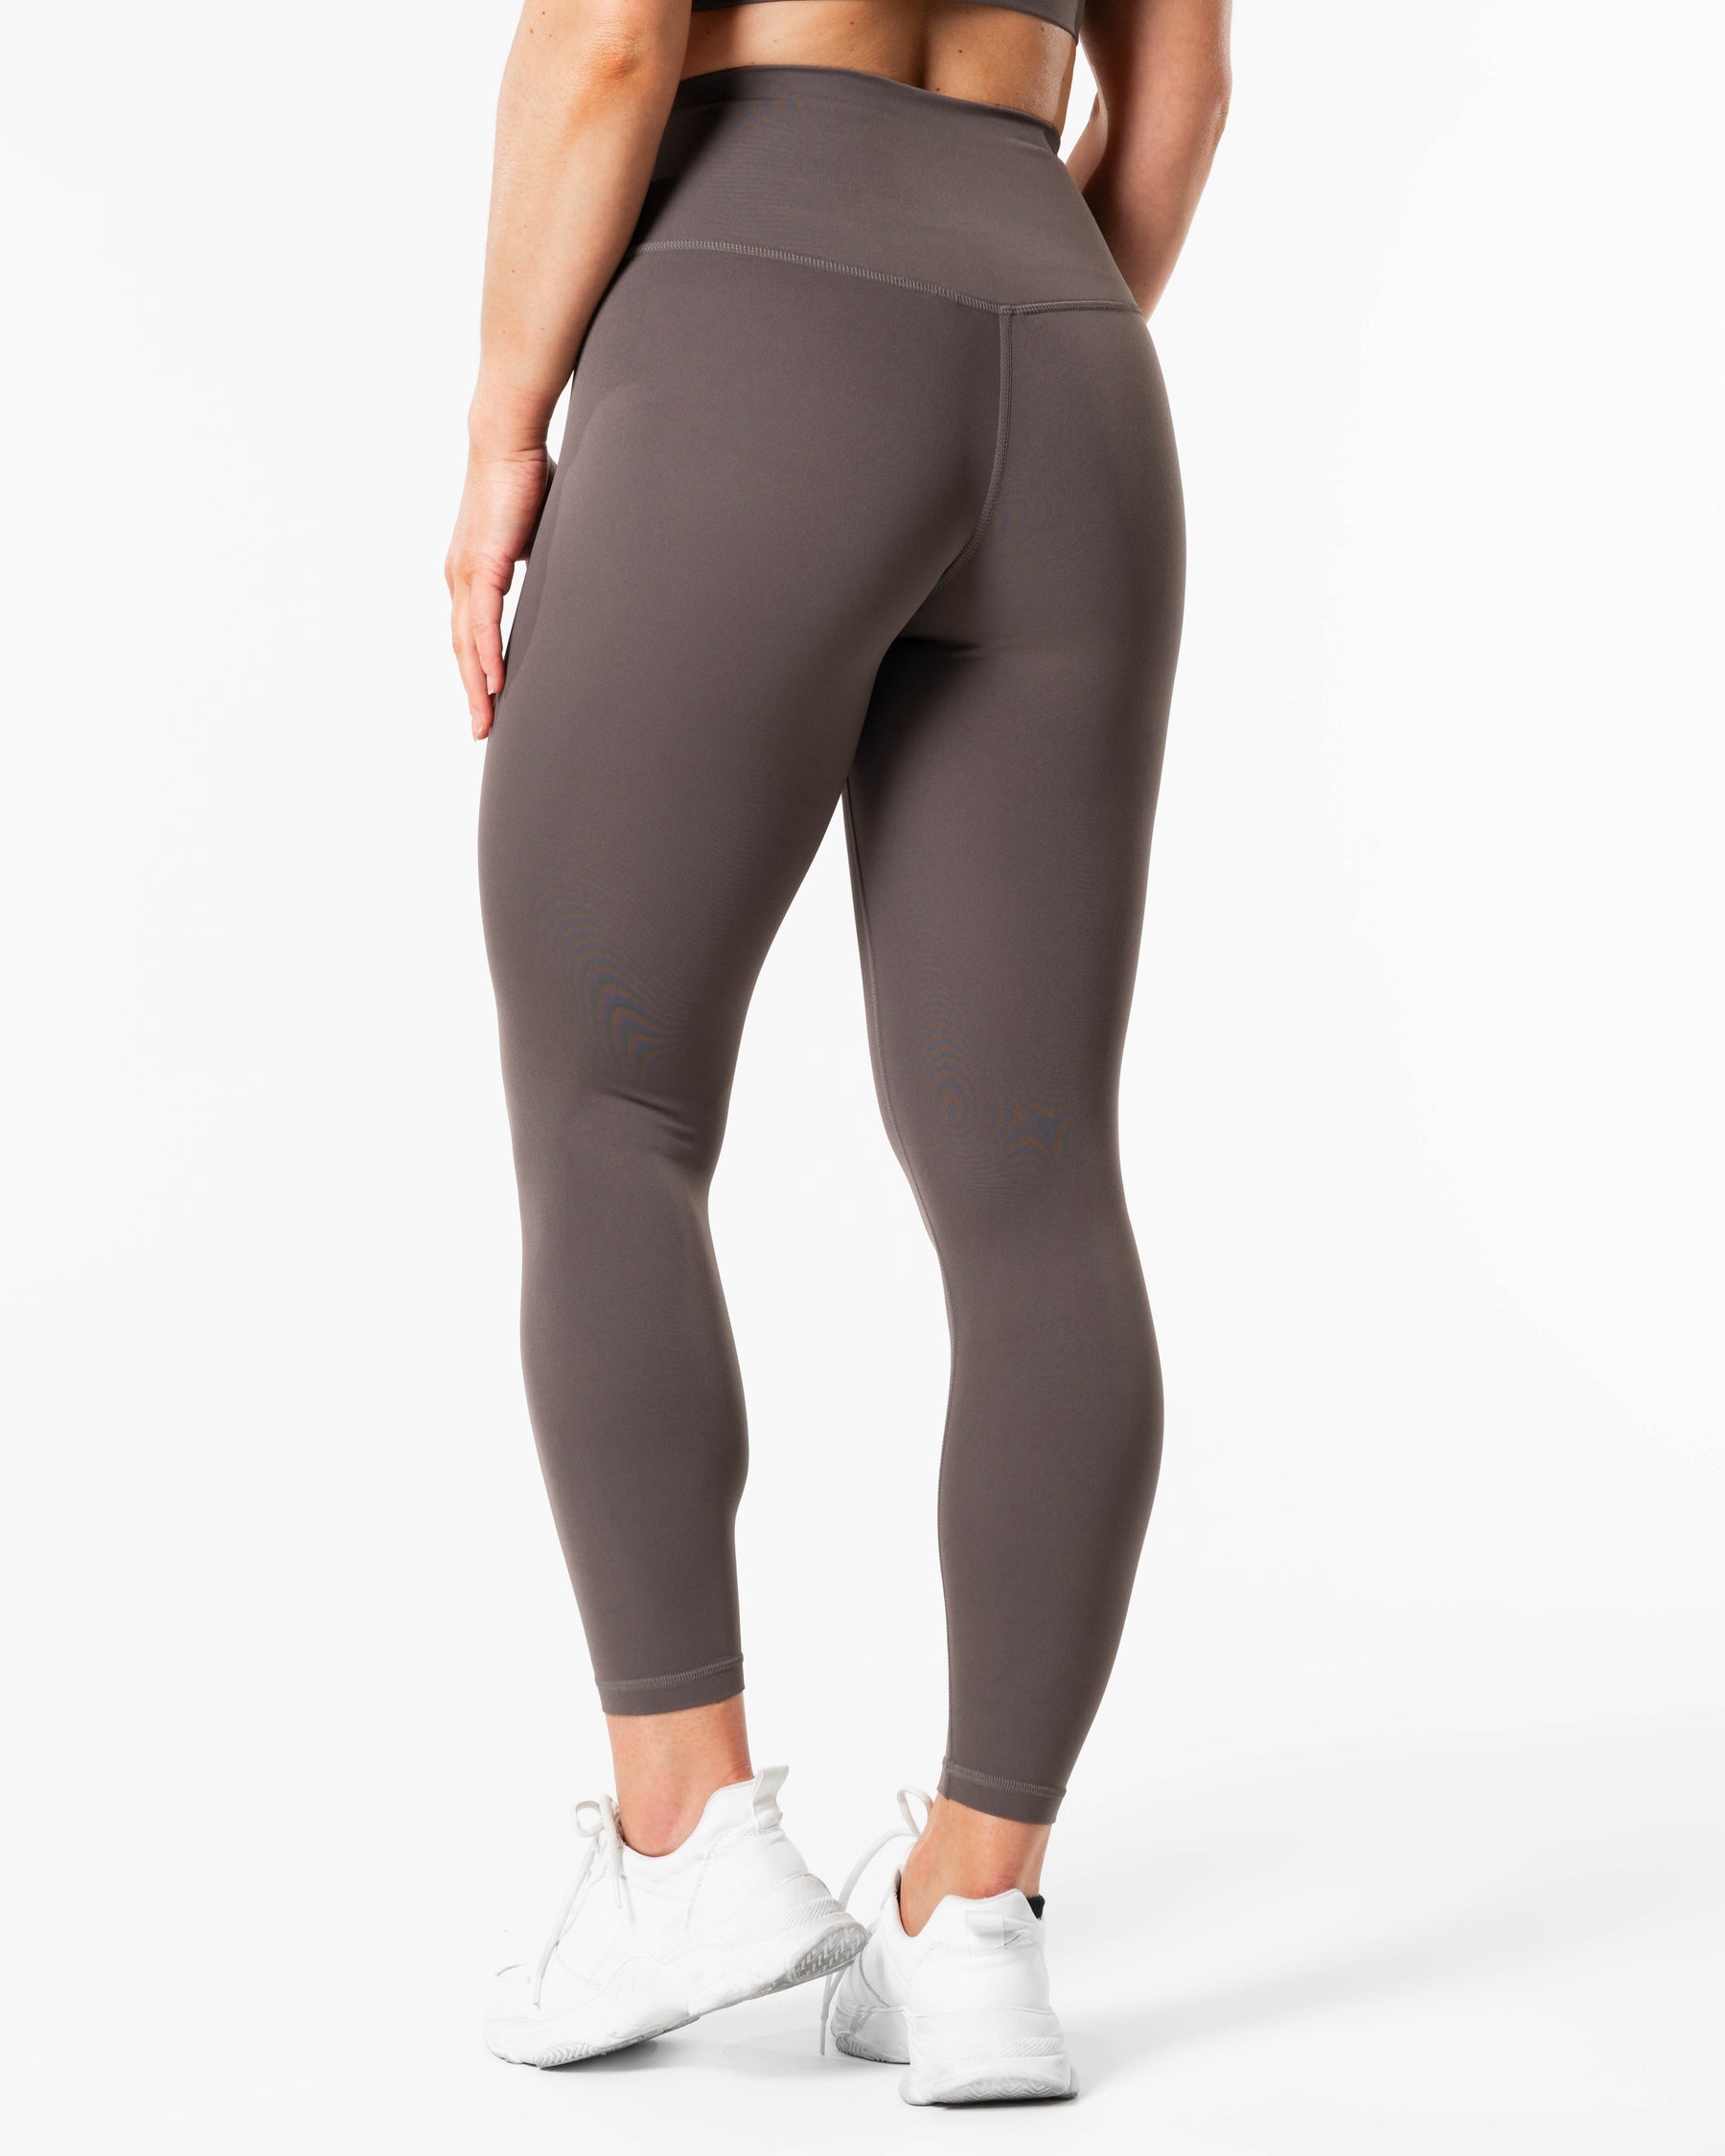 Mercy Tights - Brown